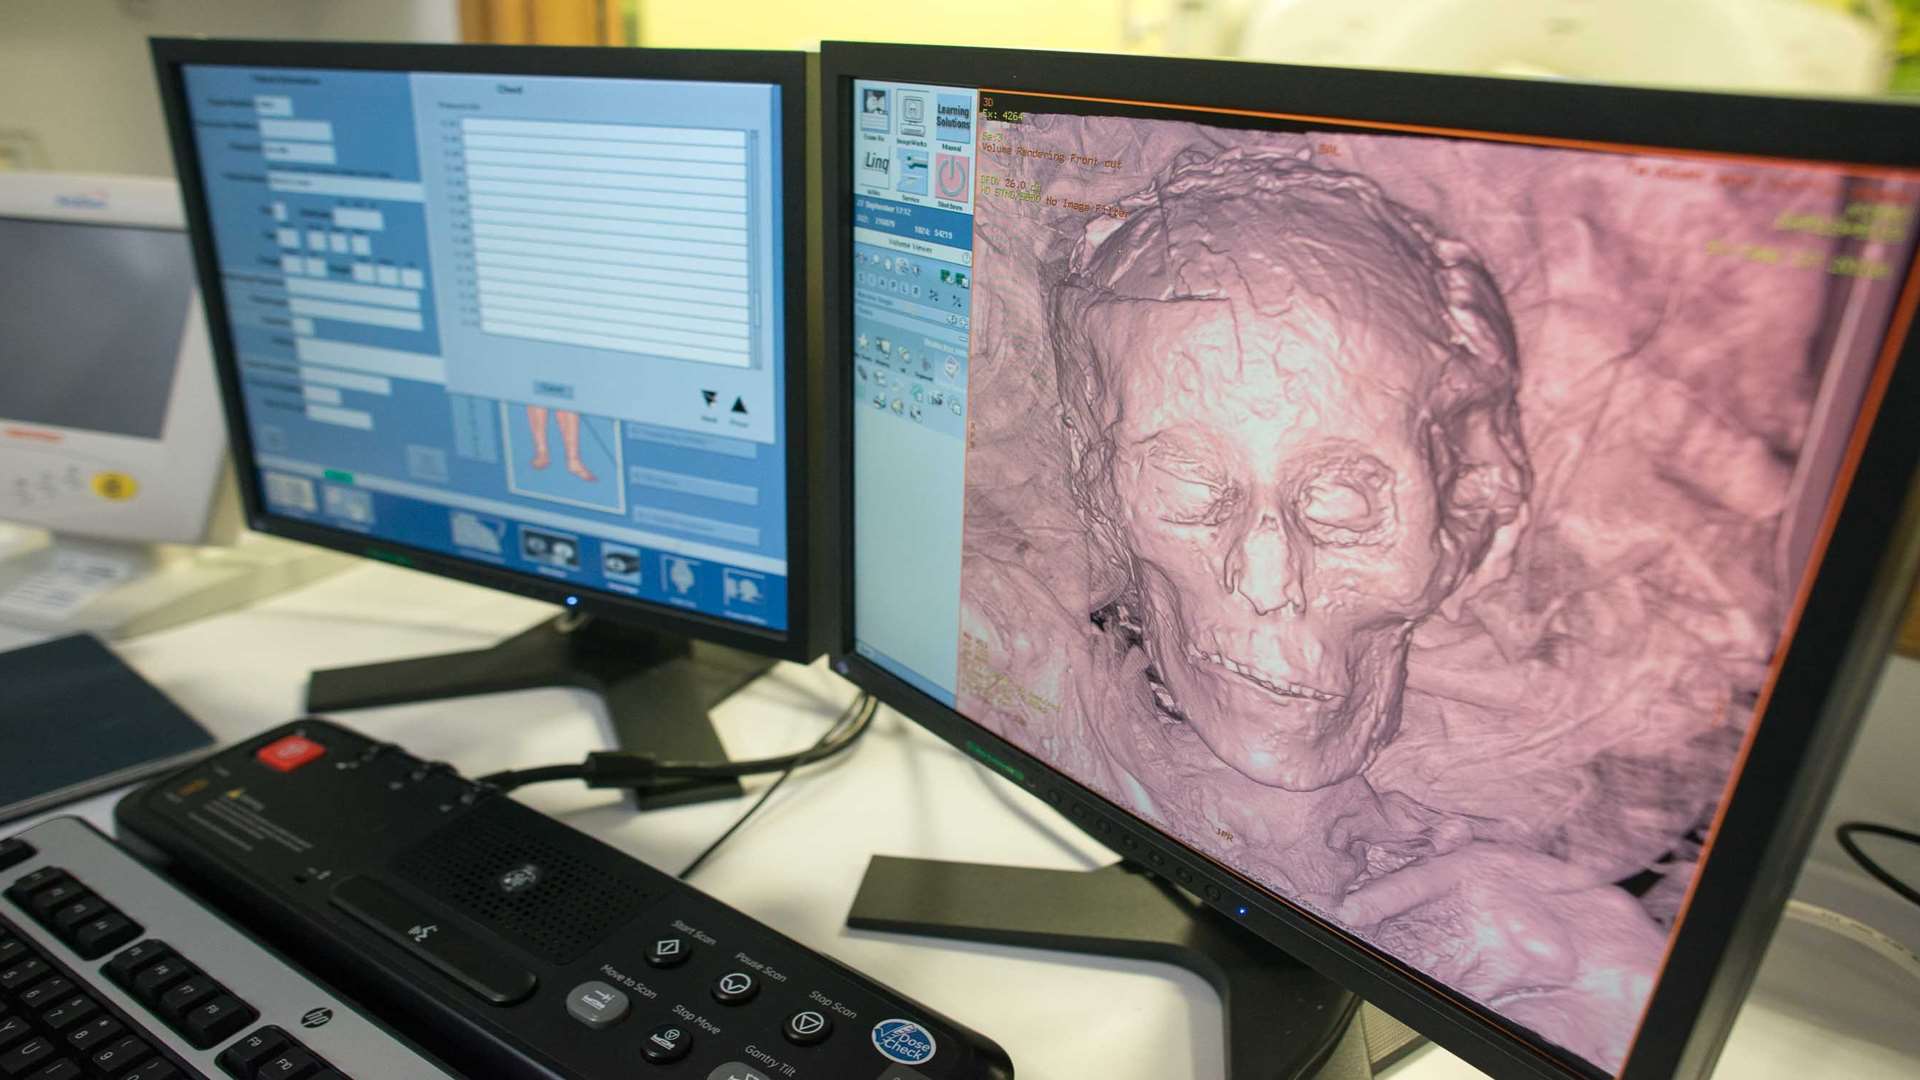 Ta-Kush's face being scanned